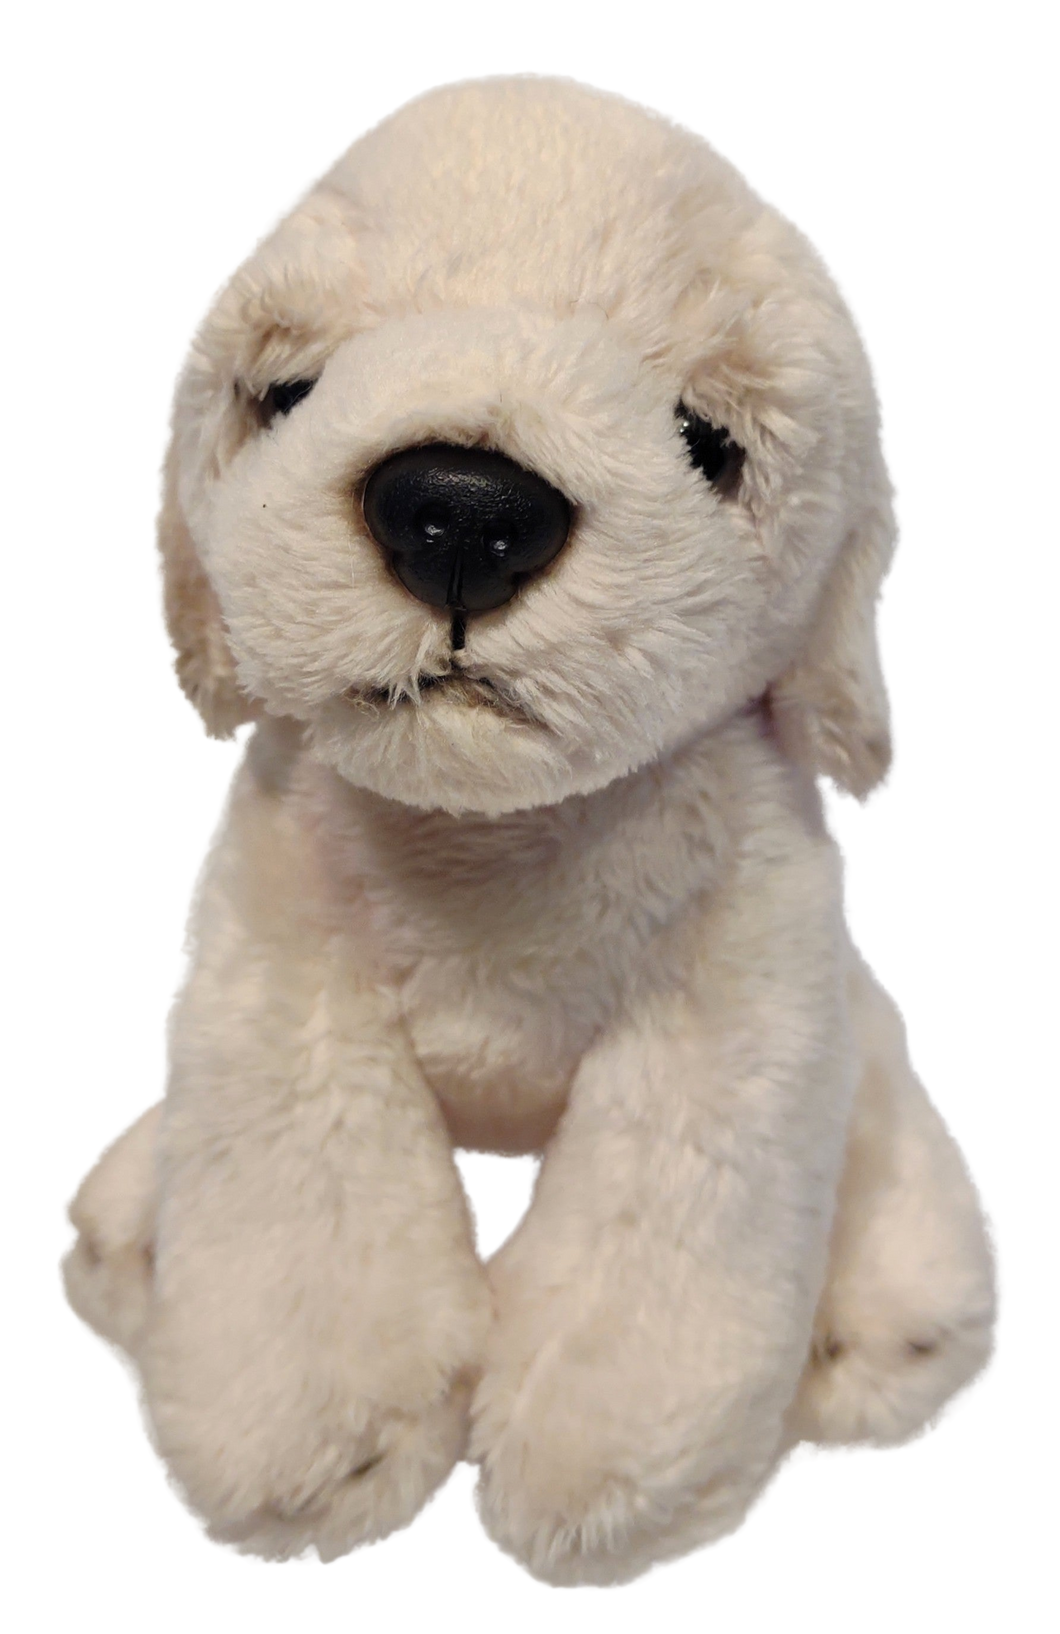 Plush Small Puppy Assortment - The Heritage  Collection